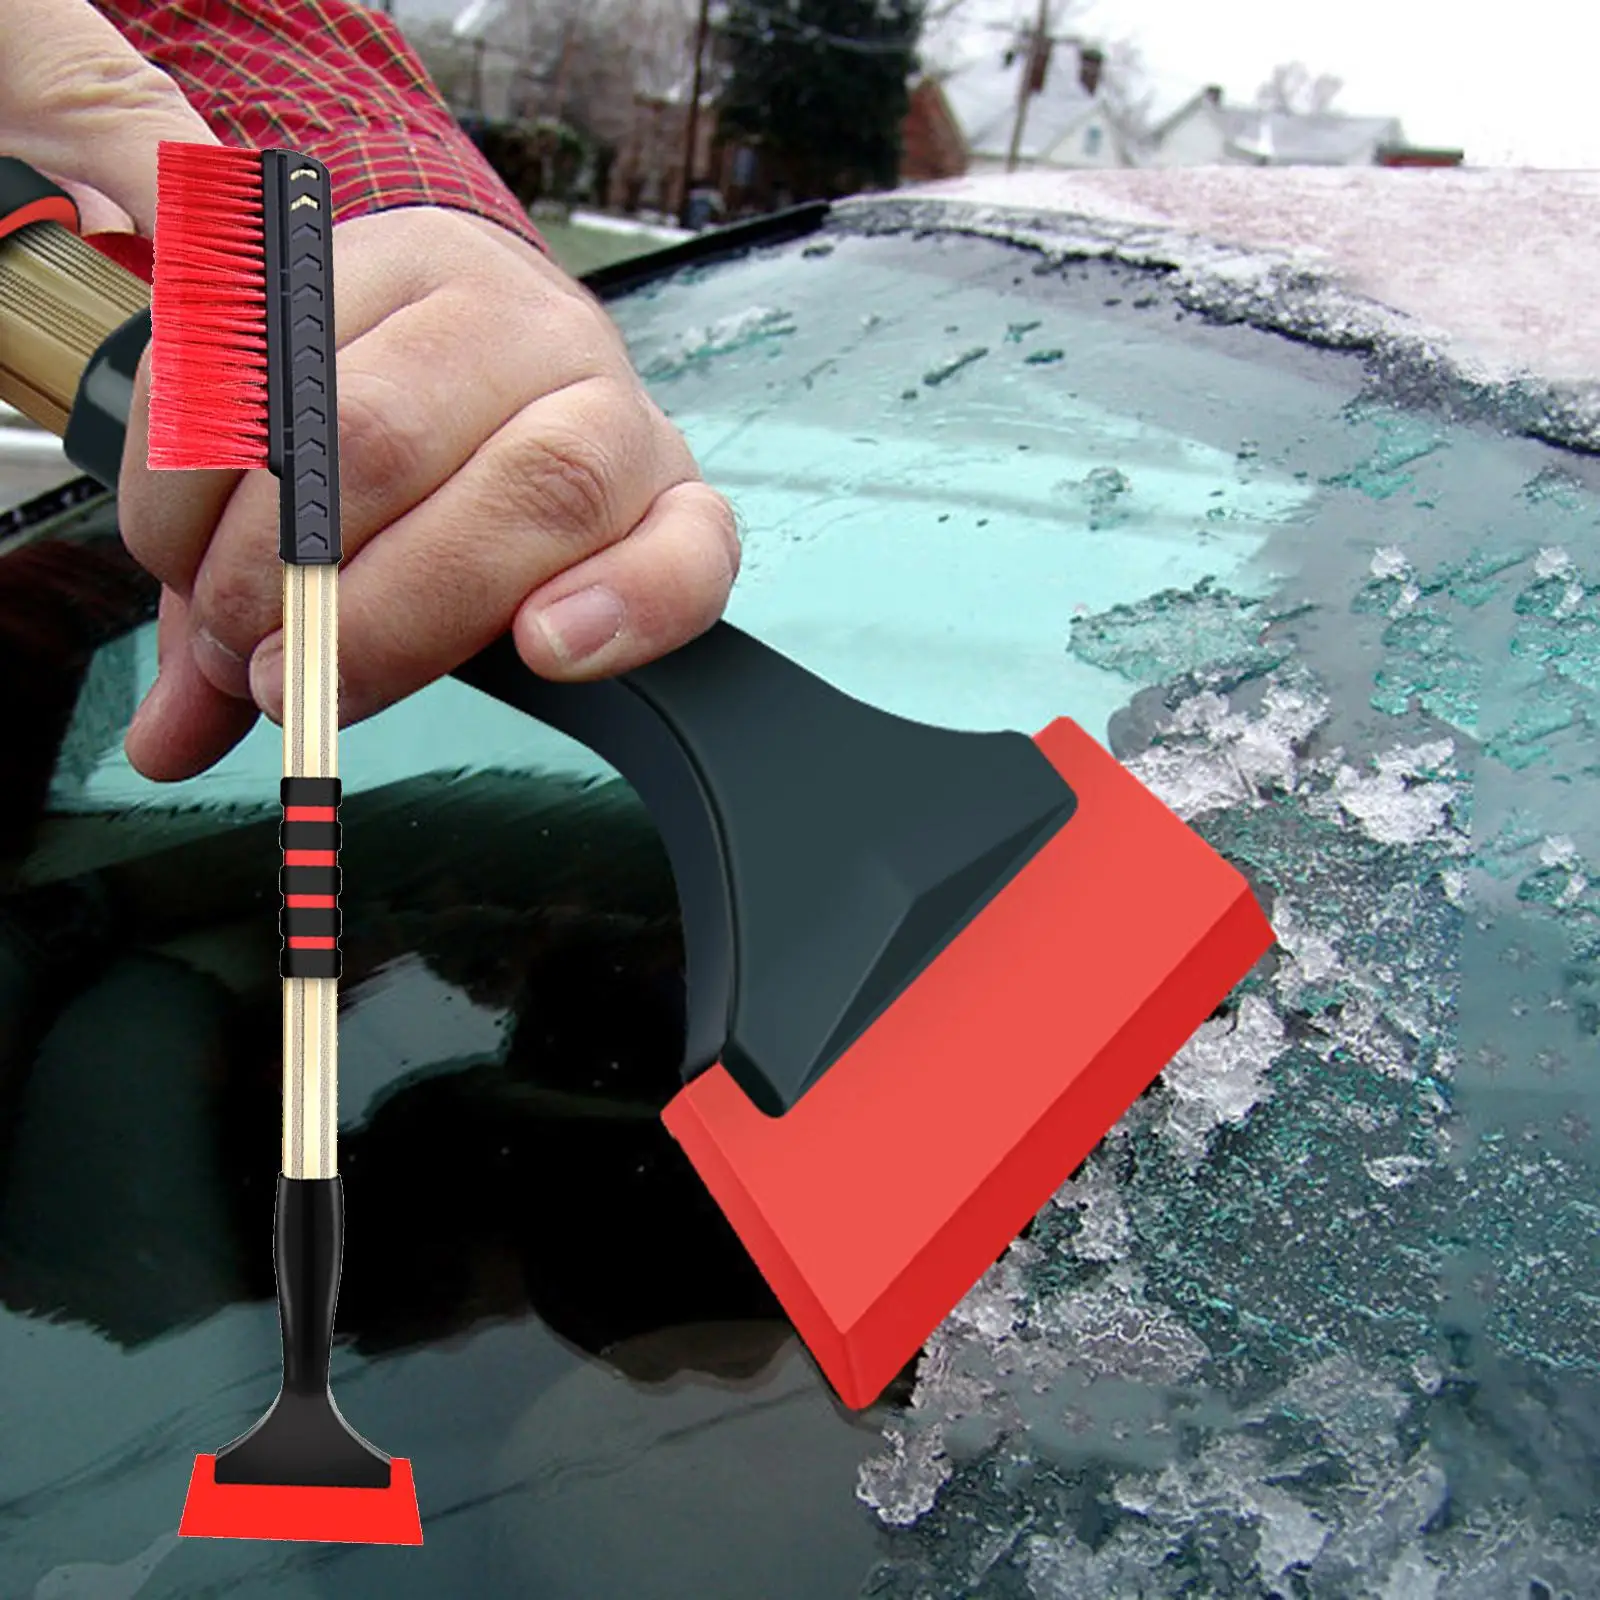 Snow Removal Brush Tool Telescopic Handle Snow Cleaning Anti Slip Sponge Grip Windshield Snow Defrosting Scraper for Car